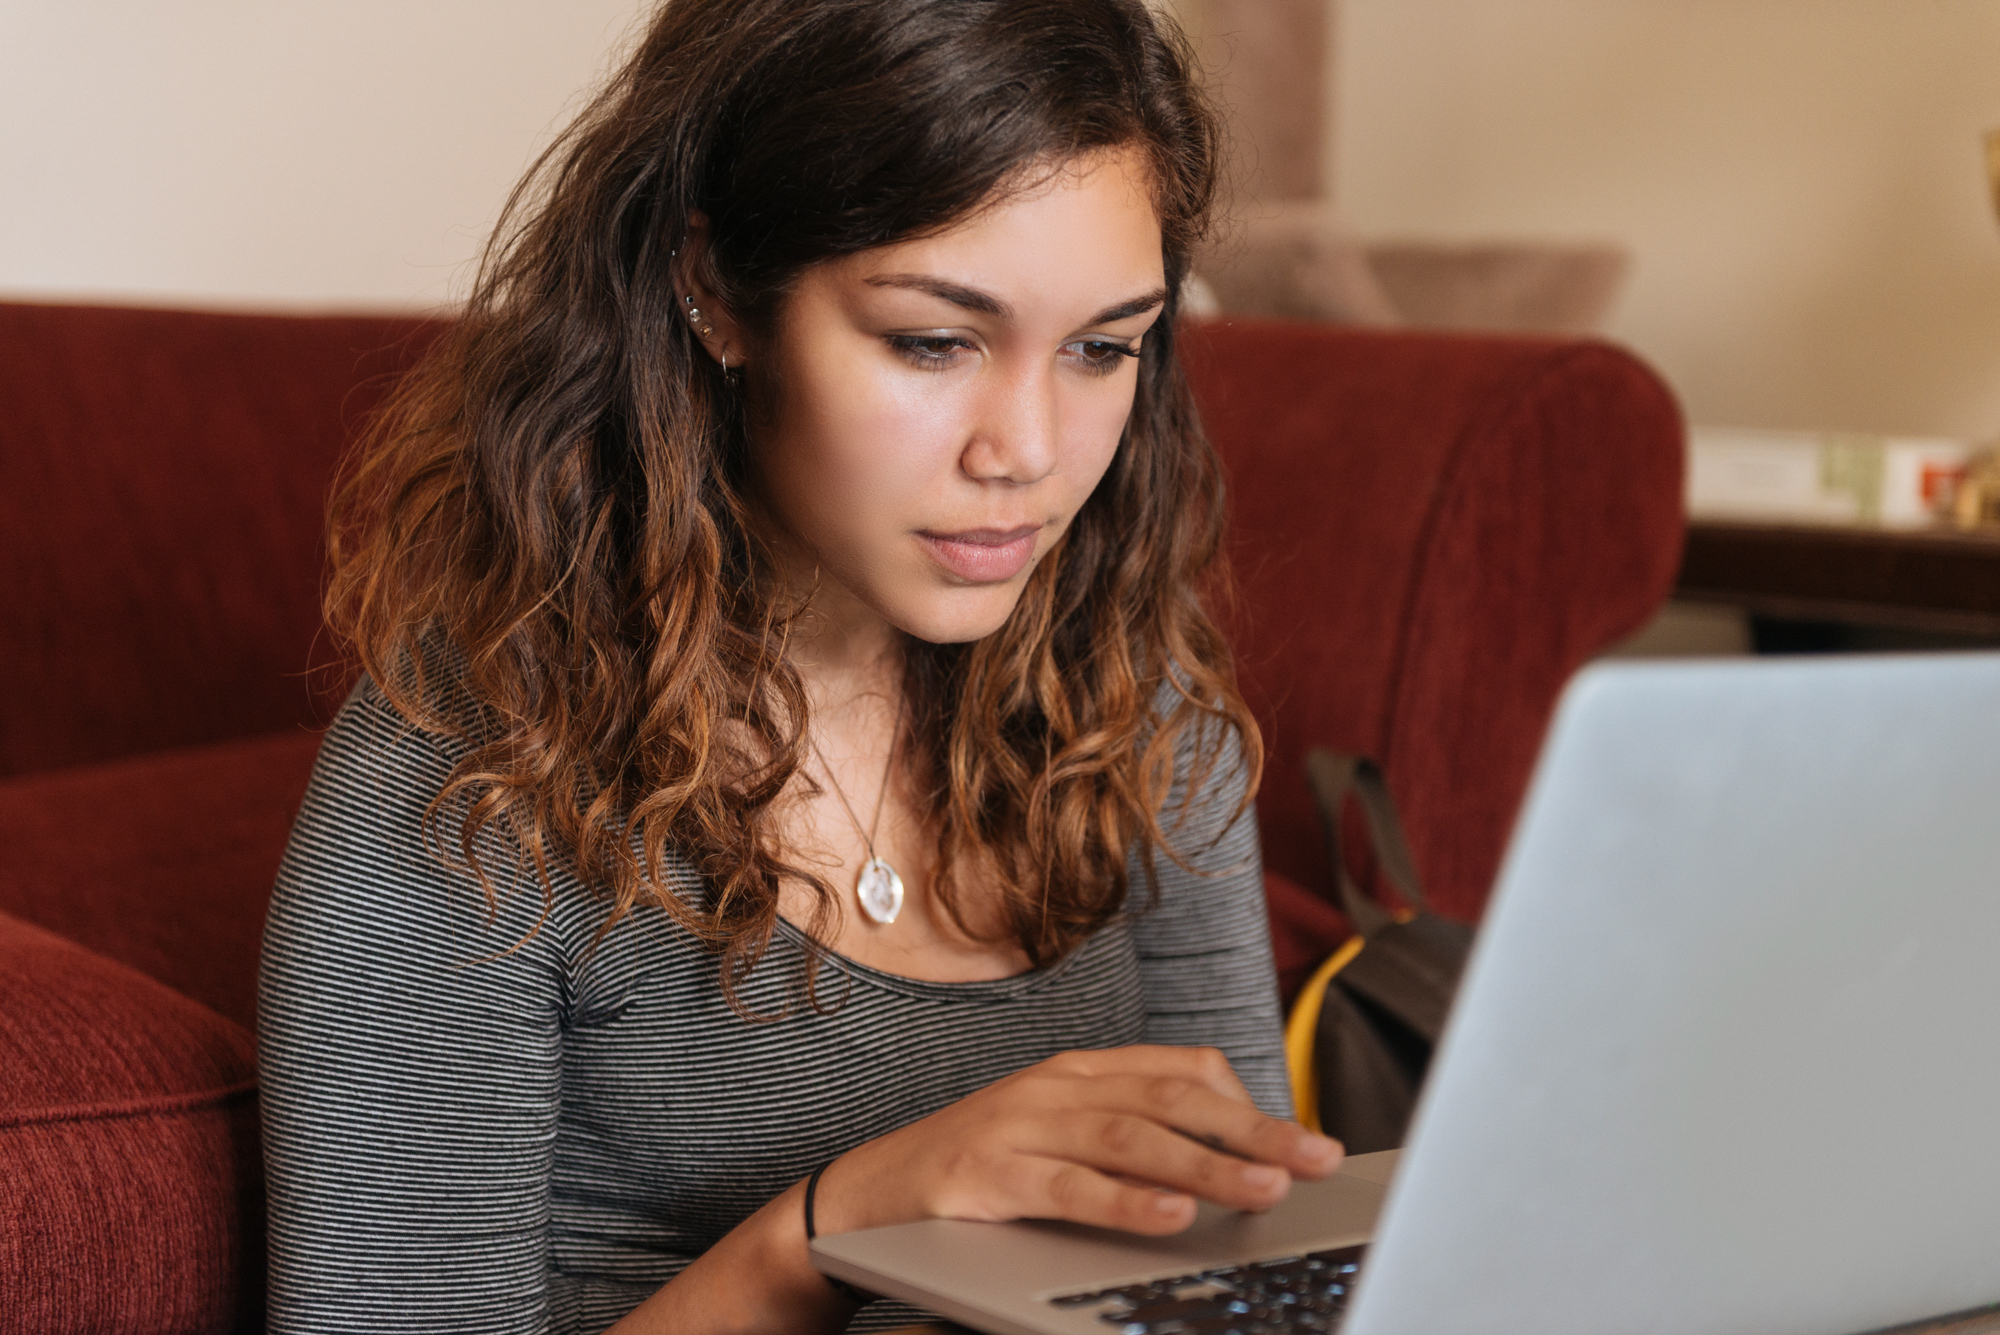 Young Woman Studies On Computer at Home for Higher Education